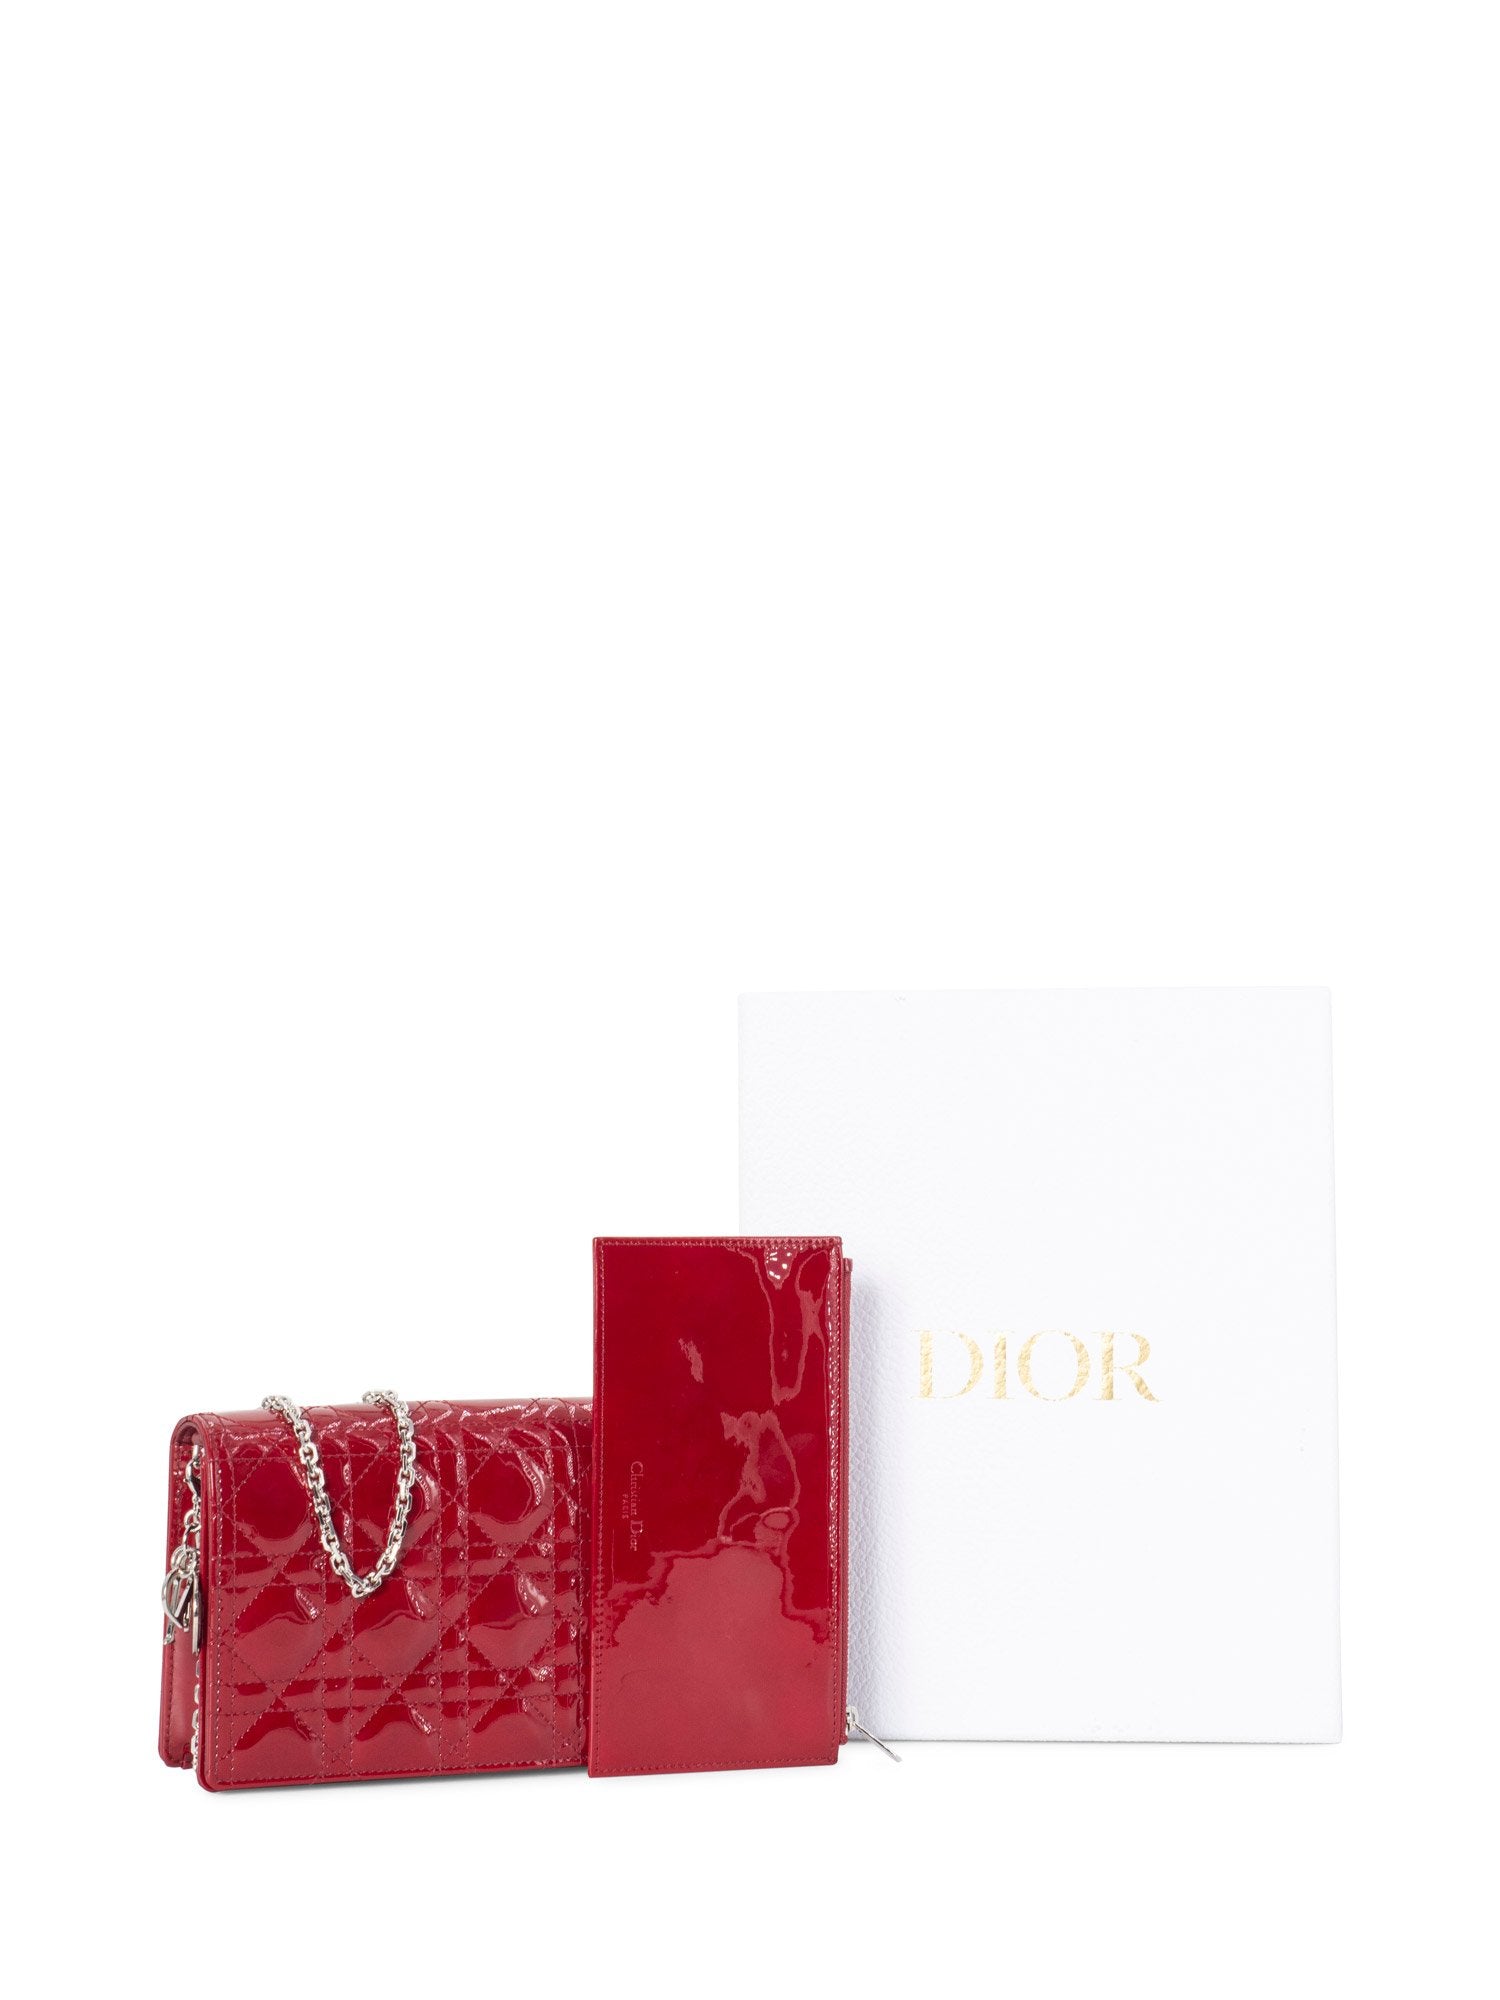 Christian Dior Patent Cannage Lady Dior WOC Bag Red-designer resale